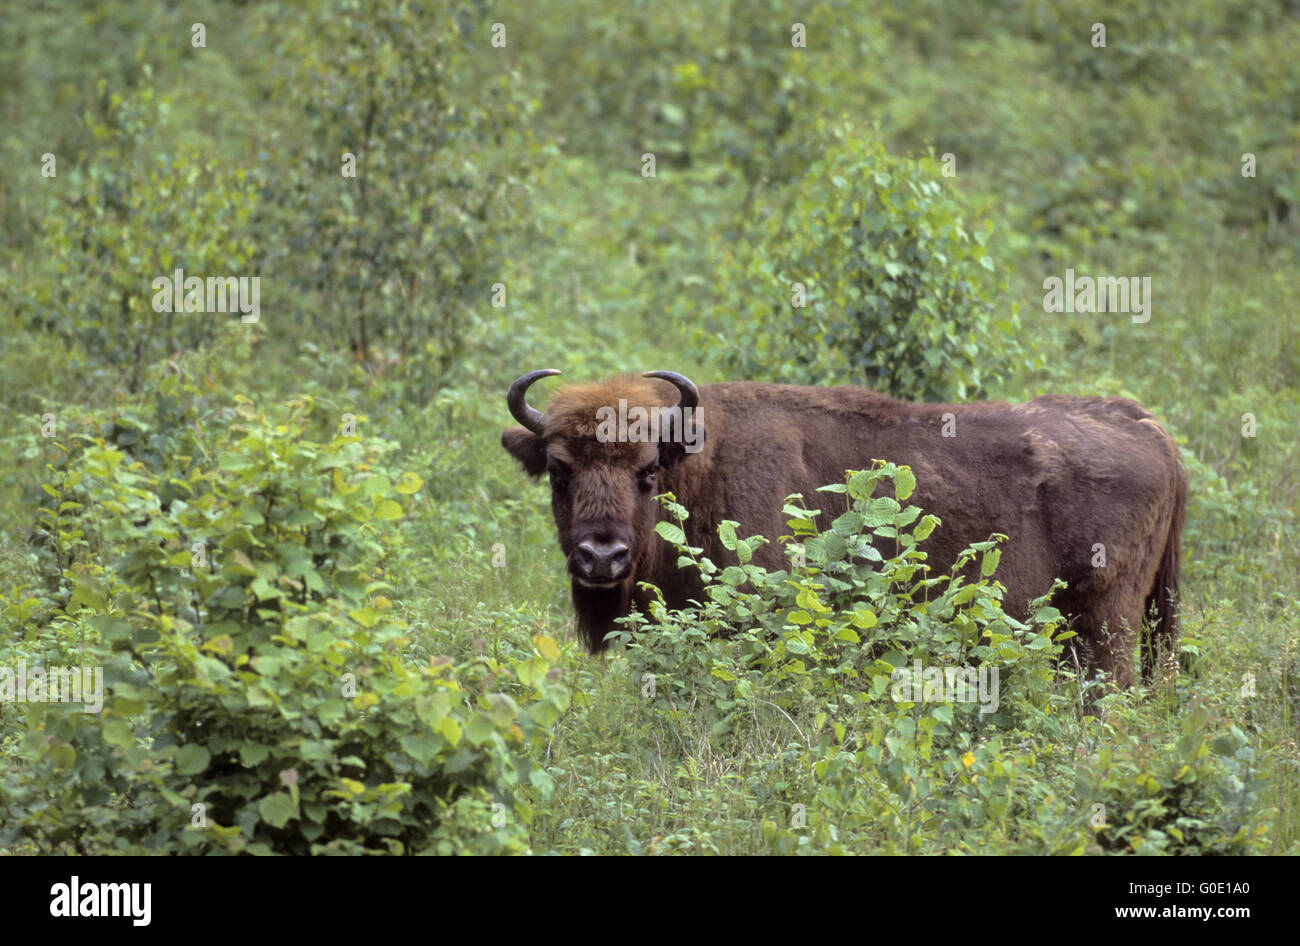 European Bison cow stands in a forest glade Stock Photo